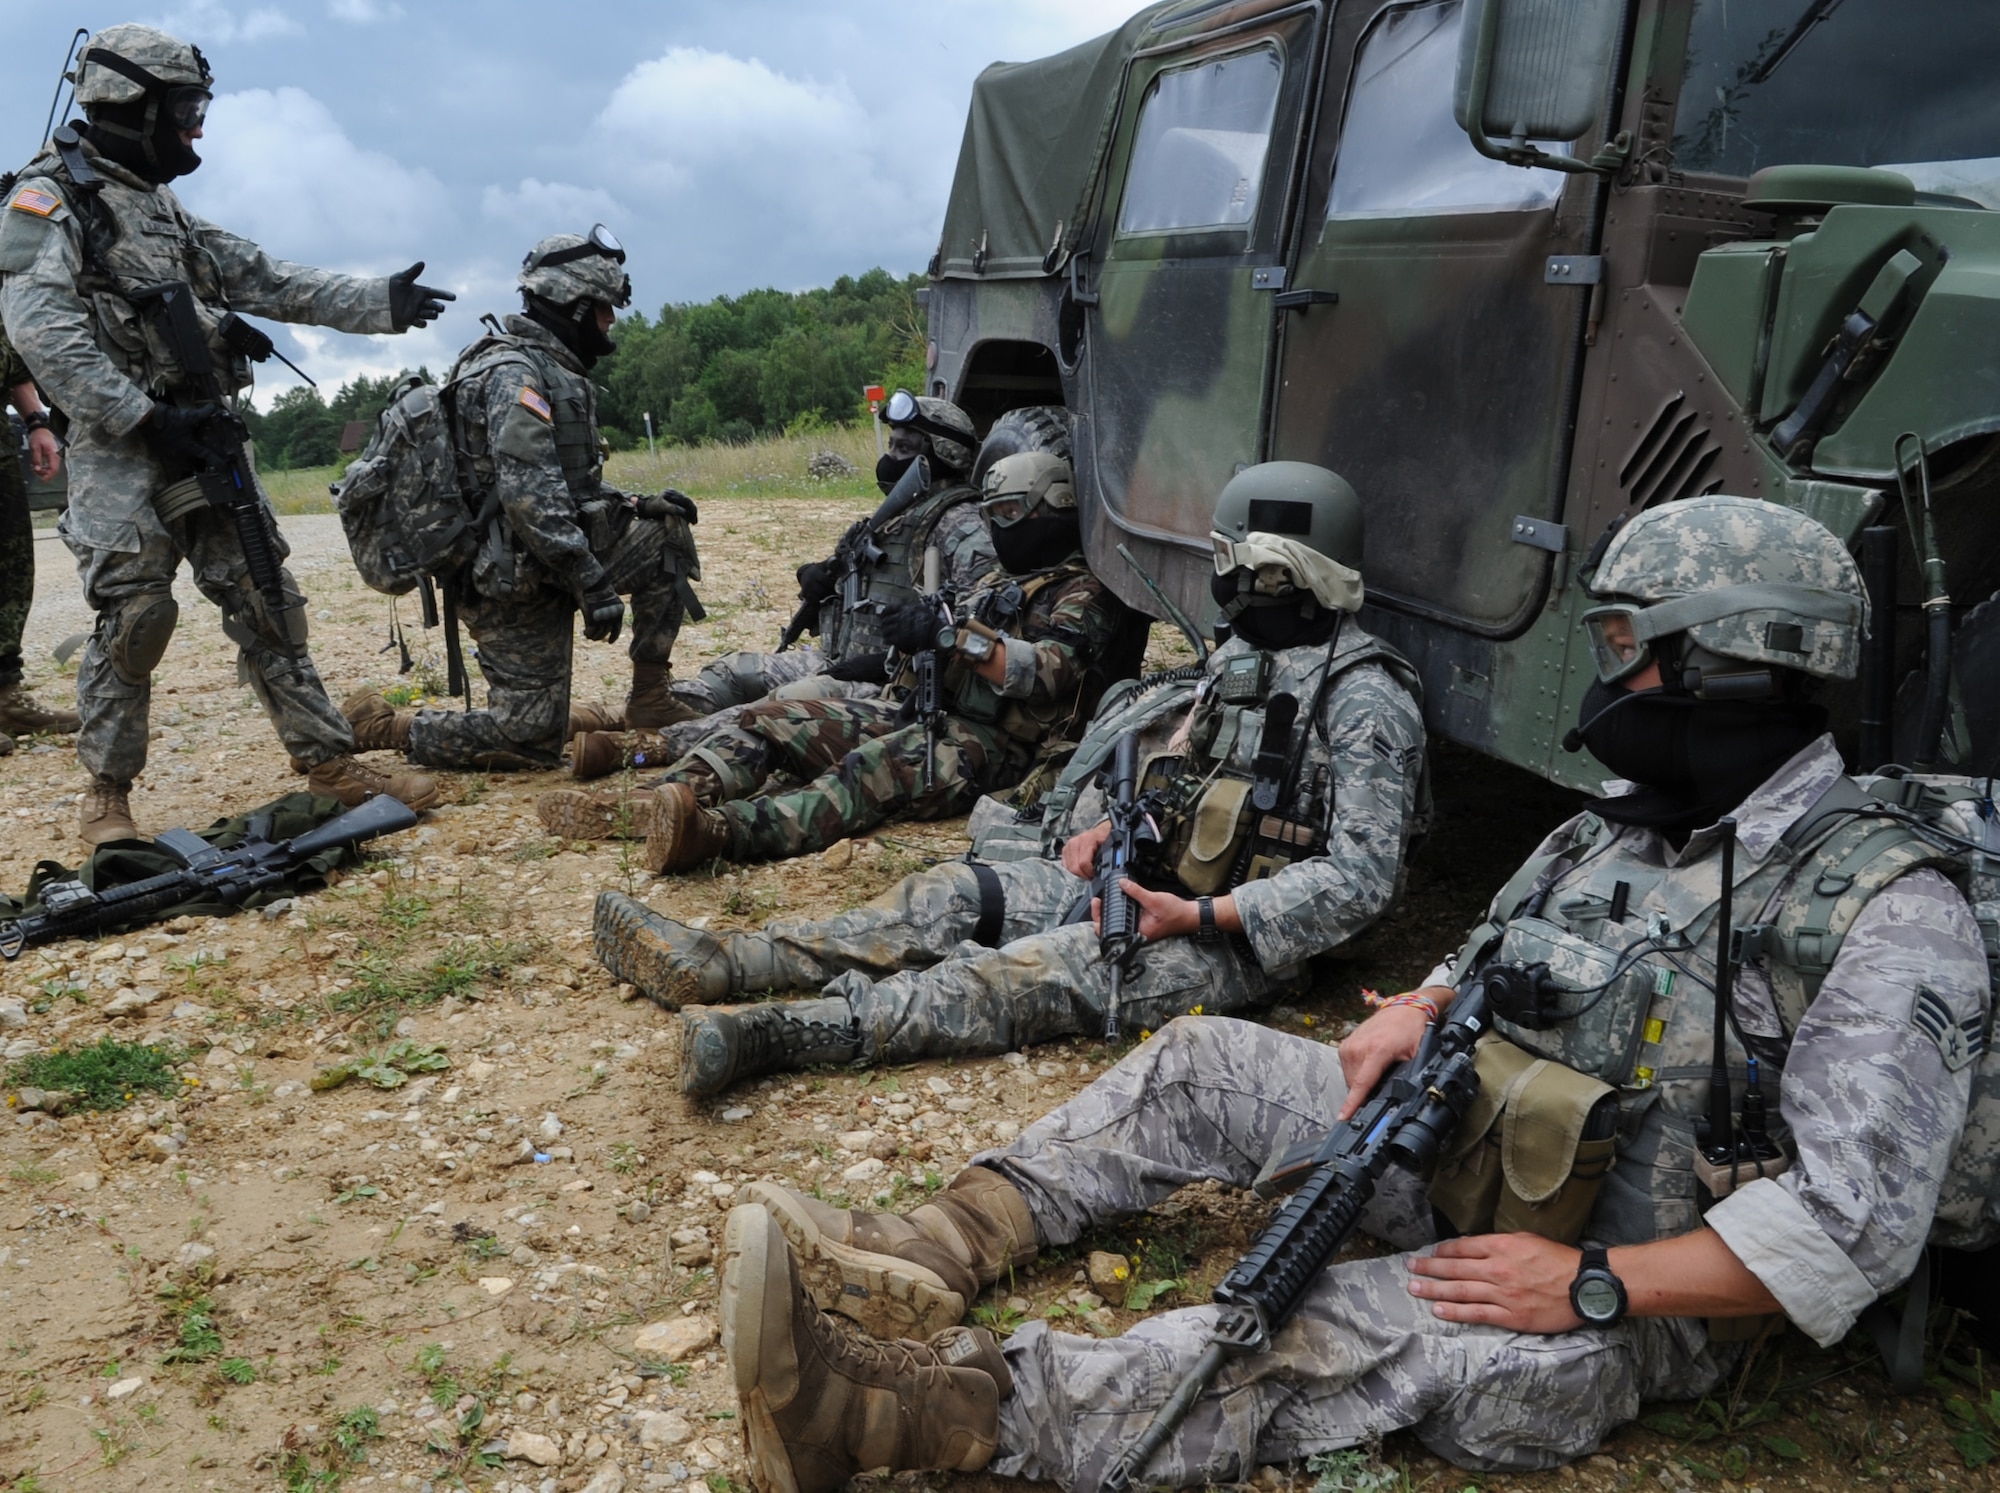 U.S. Air Force and Army members are treated for 'wounds' after an air assault mission scenario during exercise ALLIED STRIKE 10, Hohenfels, Germany, Aug. 3, 2010. AS 10 is Europe's premier close air support (CAS) exercise, held annually to conduct robust, realistic CAS training that helps build partnership capacity among allied North Atlantic Treaty Organization nations and joint services while refining the latest operational CAS tactics. For more ALLIED STRIKE information go to www.usafe.af.mil/alliedstrike.asp. (U.S. Air Force photo by Senior Airman Caleb Pierce)